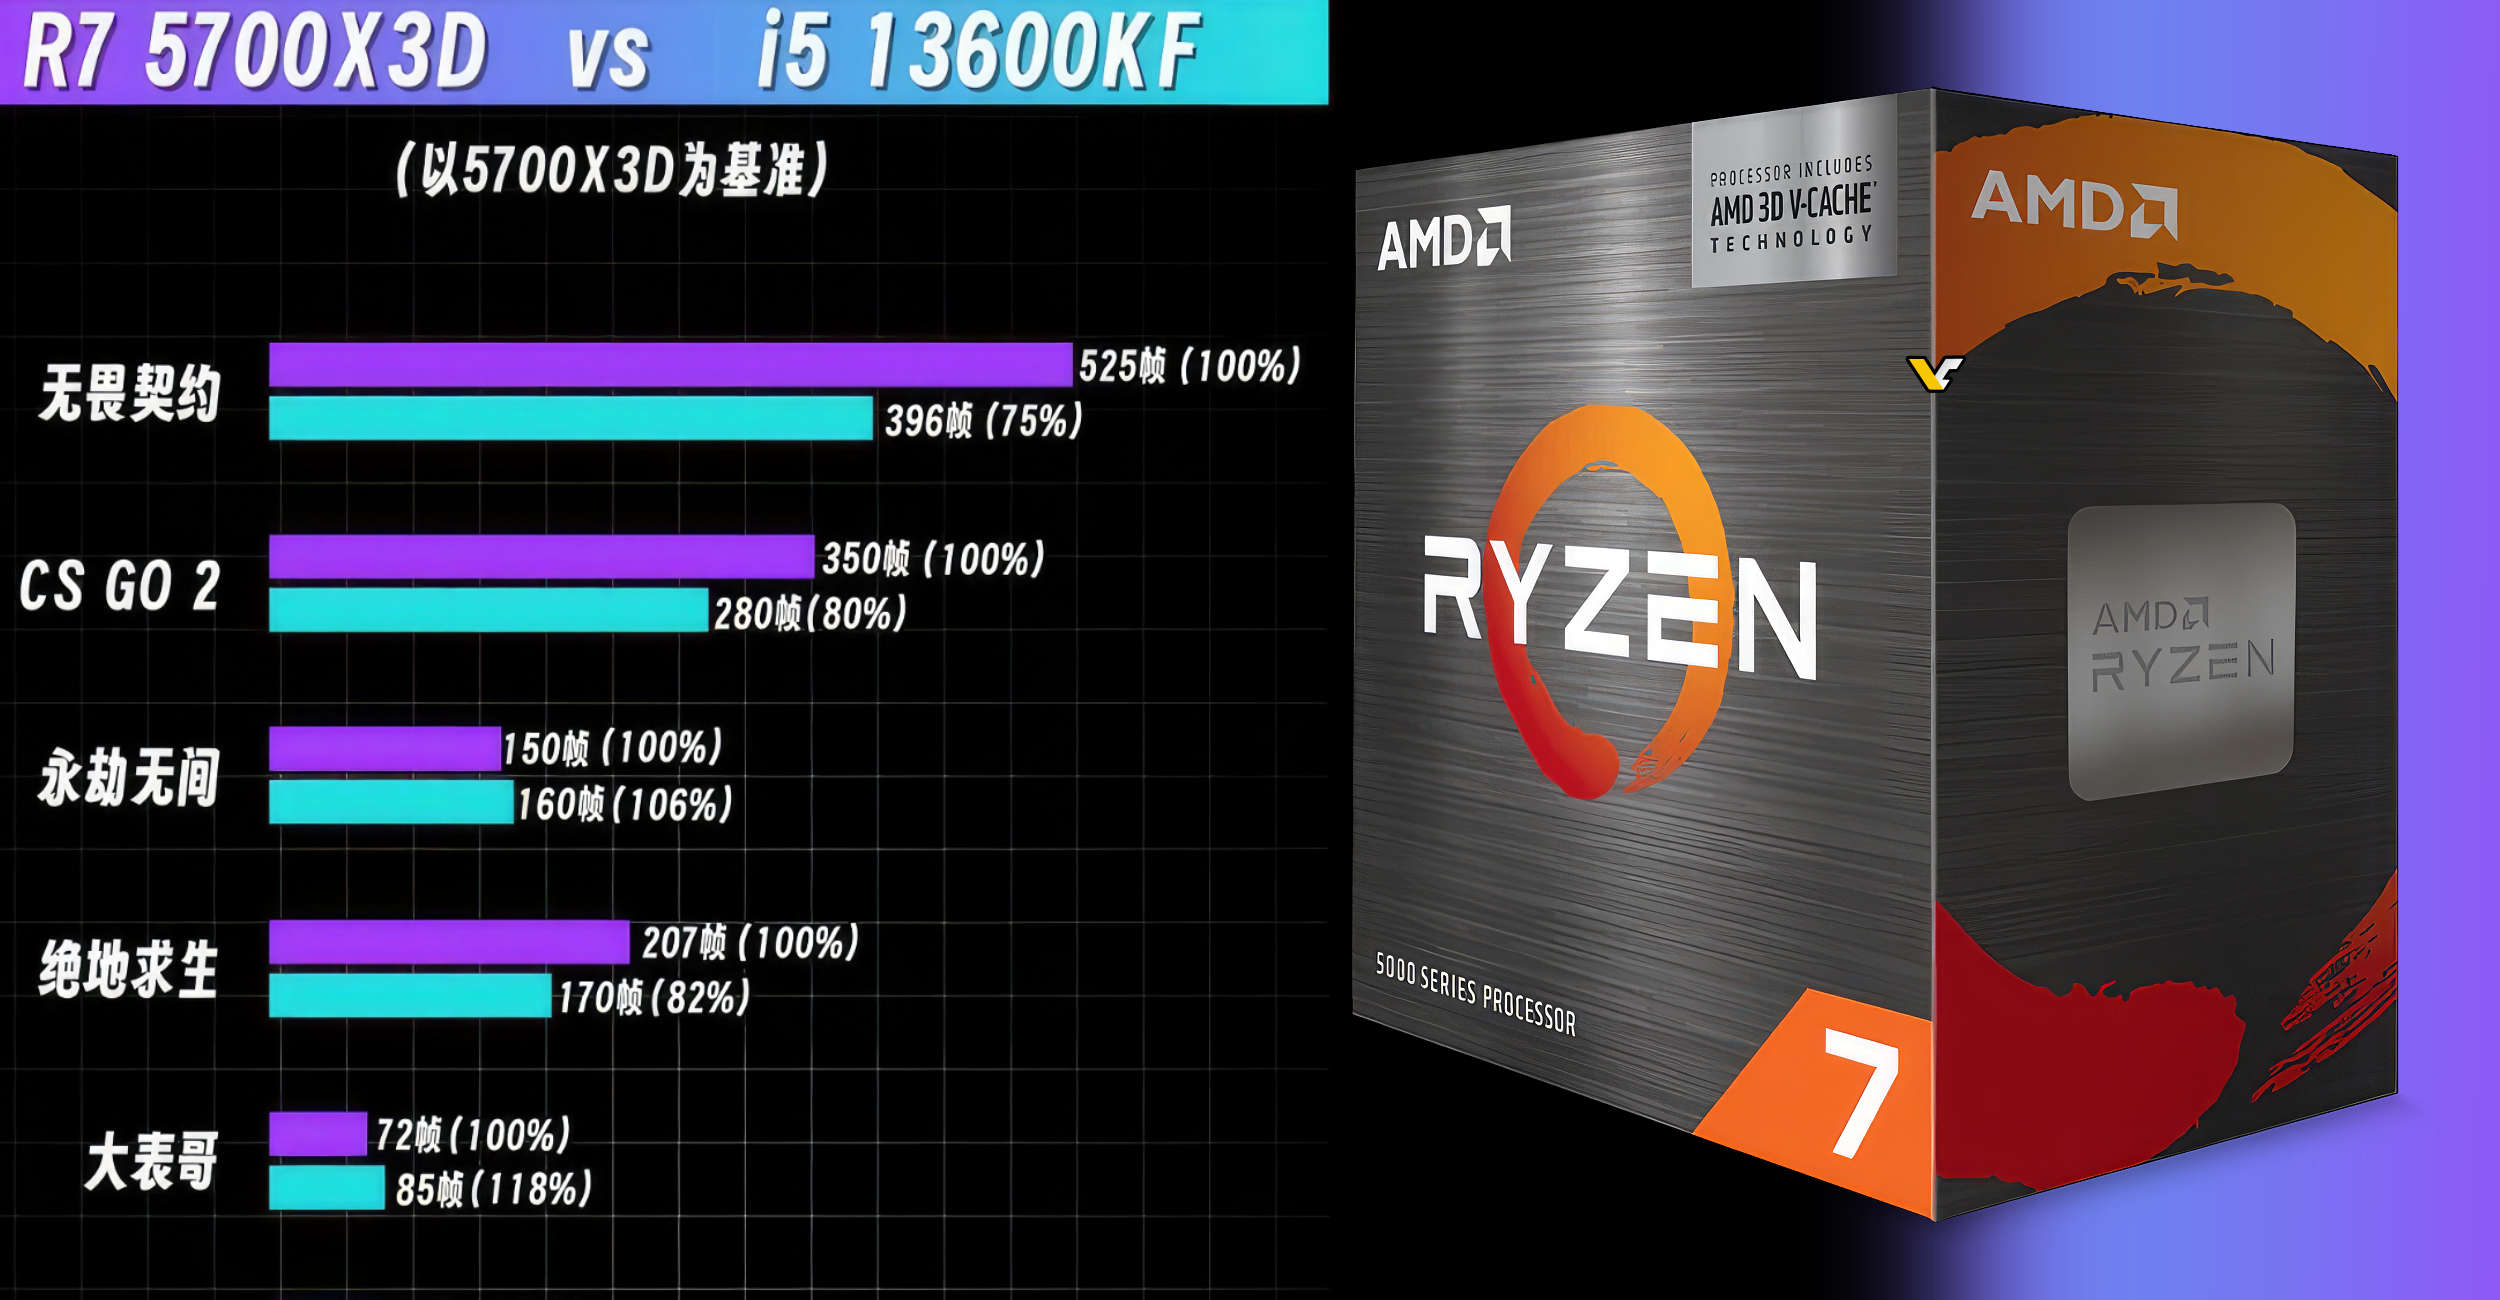 Get Your Game On with AMD Ryzen 7 5700X 3D: Powerful AM4 CPU Now Accessible at 9